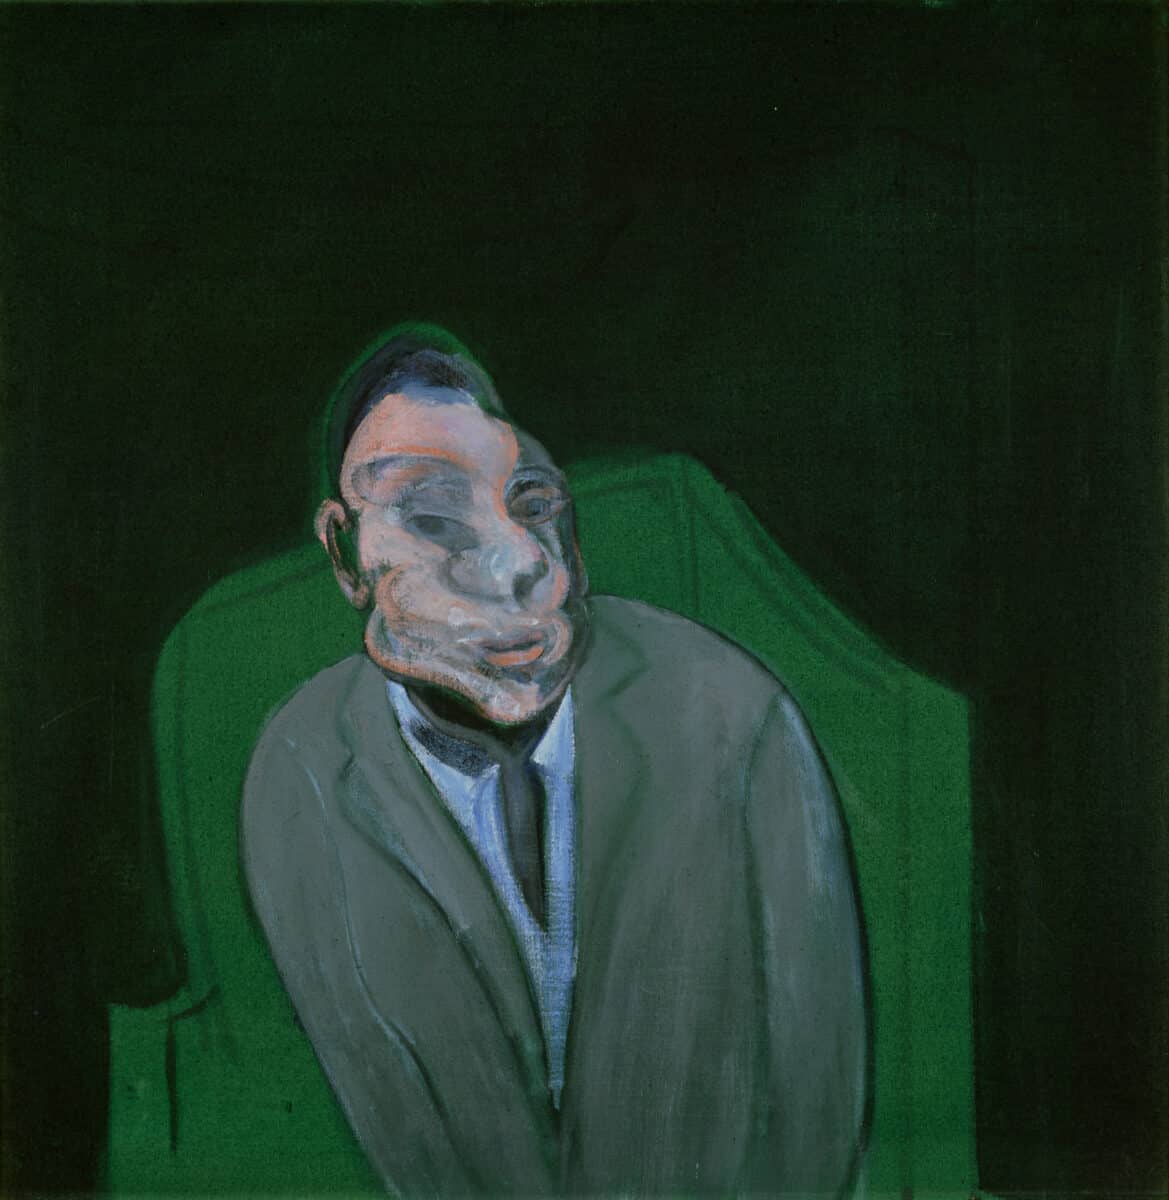 FRANCIS BACON Head of a Man (Self-Portrait), 1960 Oil on canvas 33 9/16 x 33 9/16 in 85.2 x 85.2 cm © Estate of Francis Bacon. All Rights Reserved, DACS 2022 Courtesy Sainsbury Centre, University of East Anglia